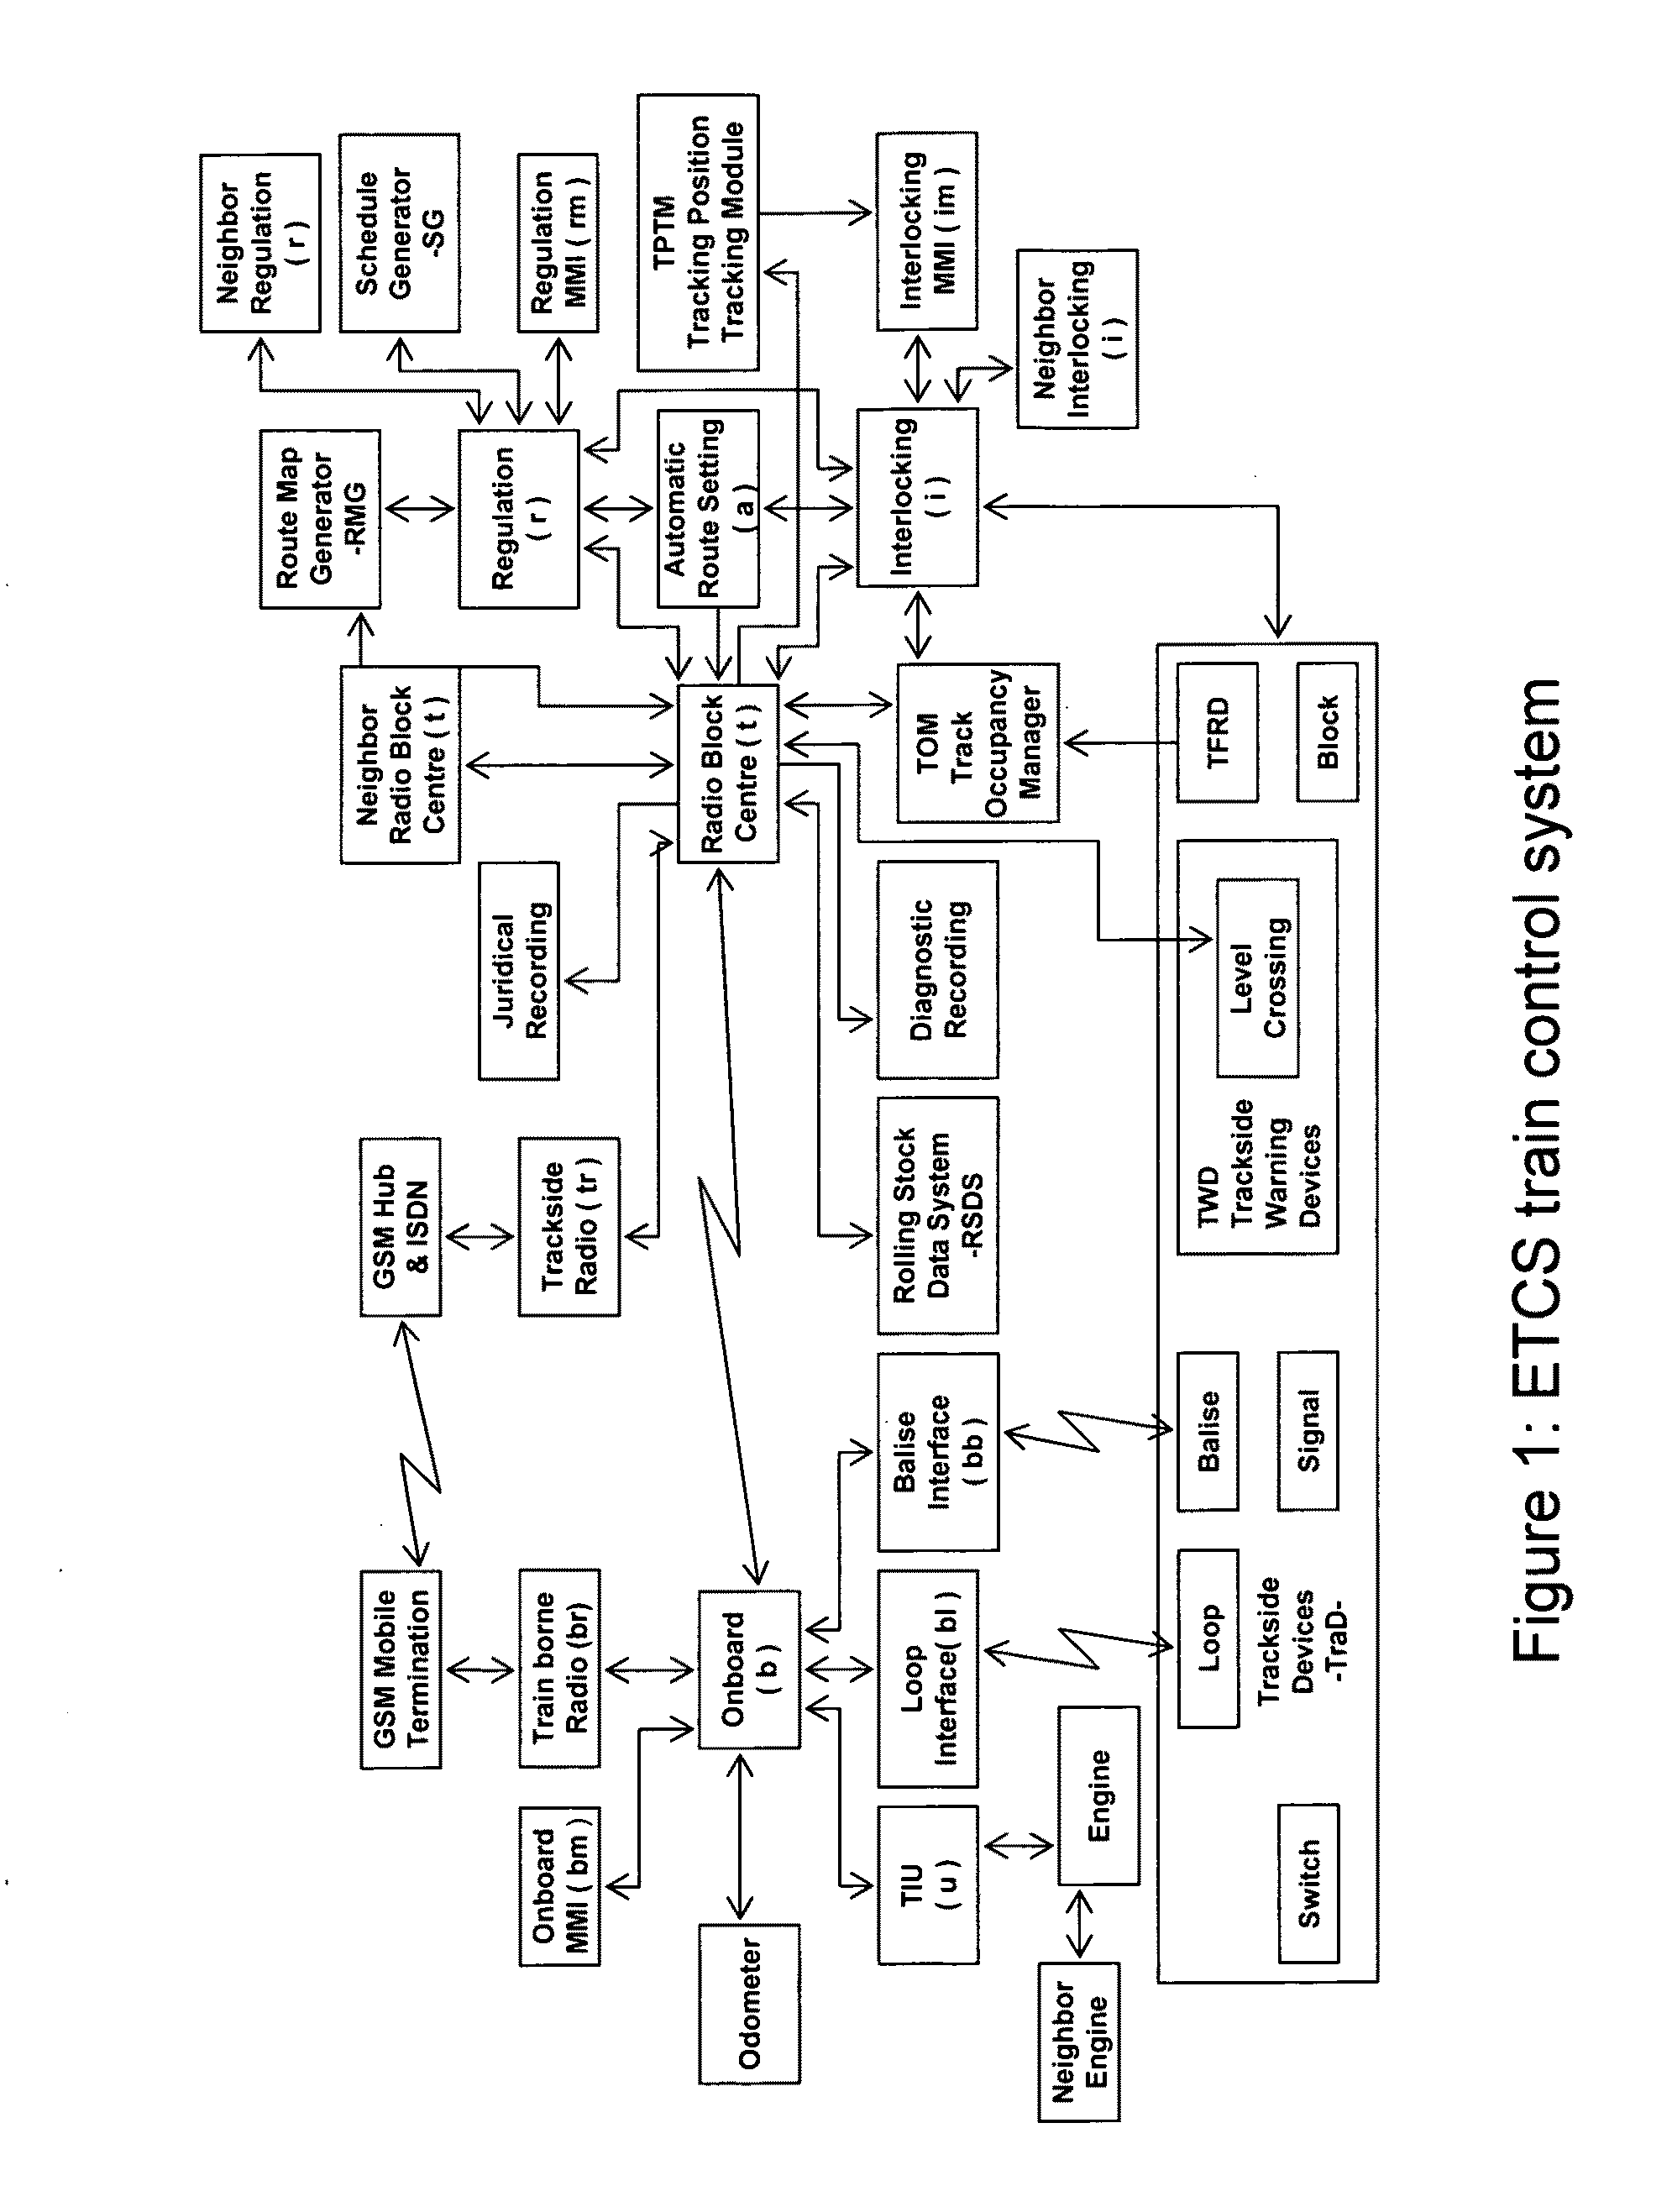 System and apparatus for high speed train communication